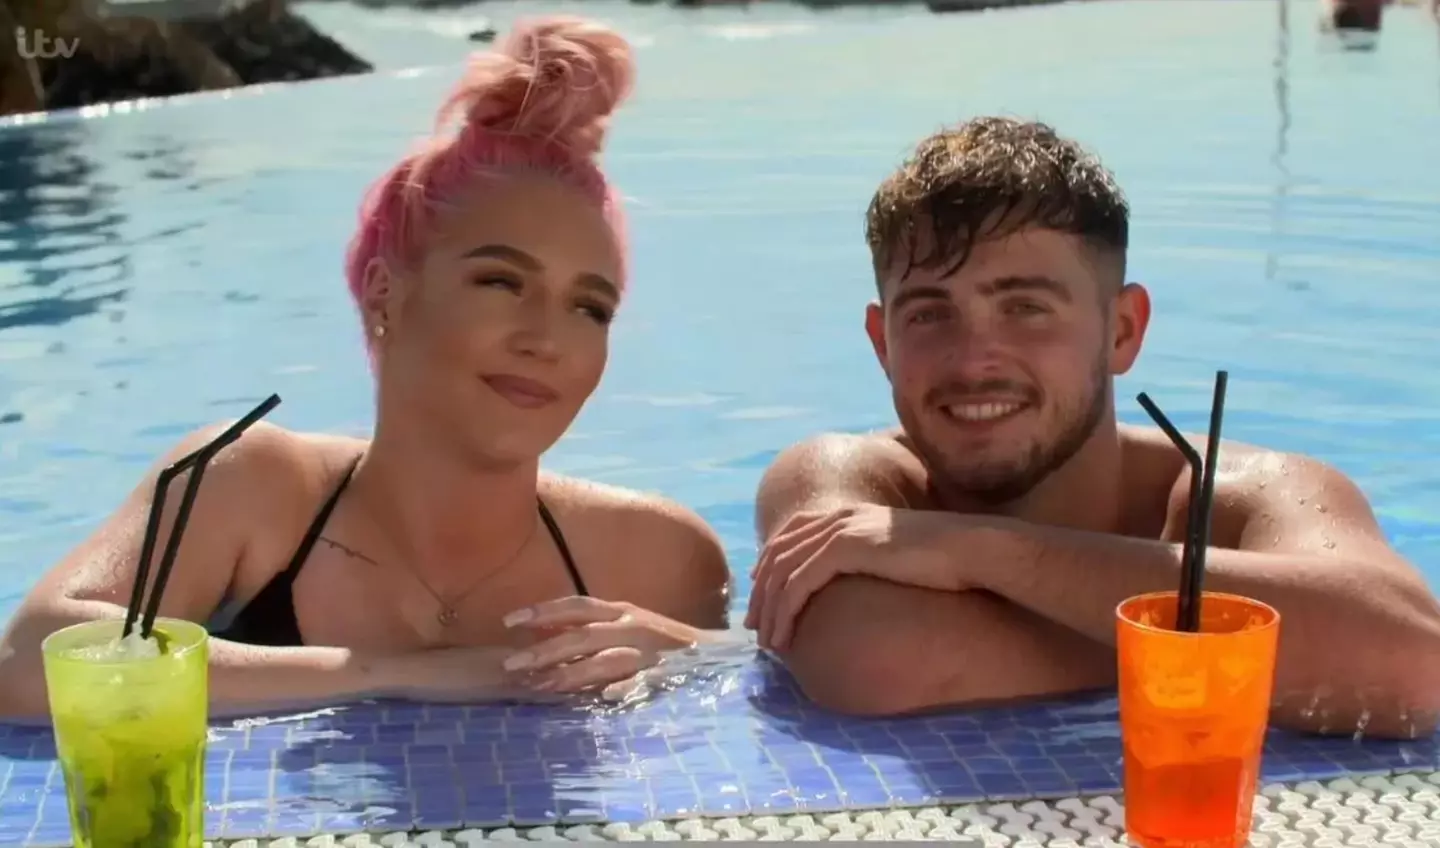 Paiton Barker and Ryan Lenton met on the show in 2018.